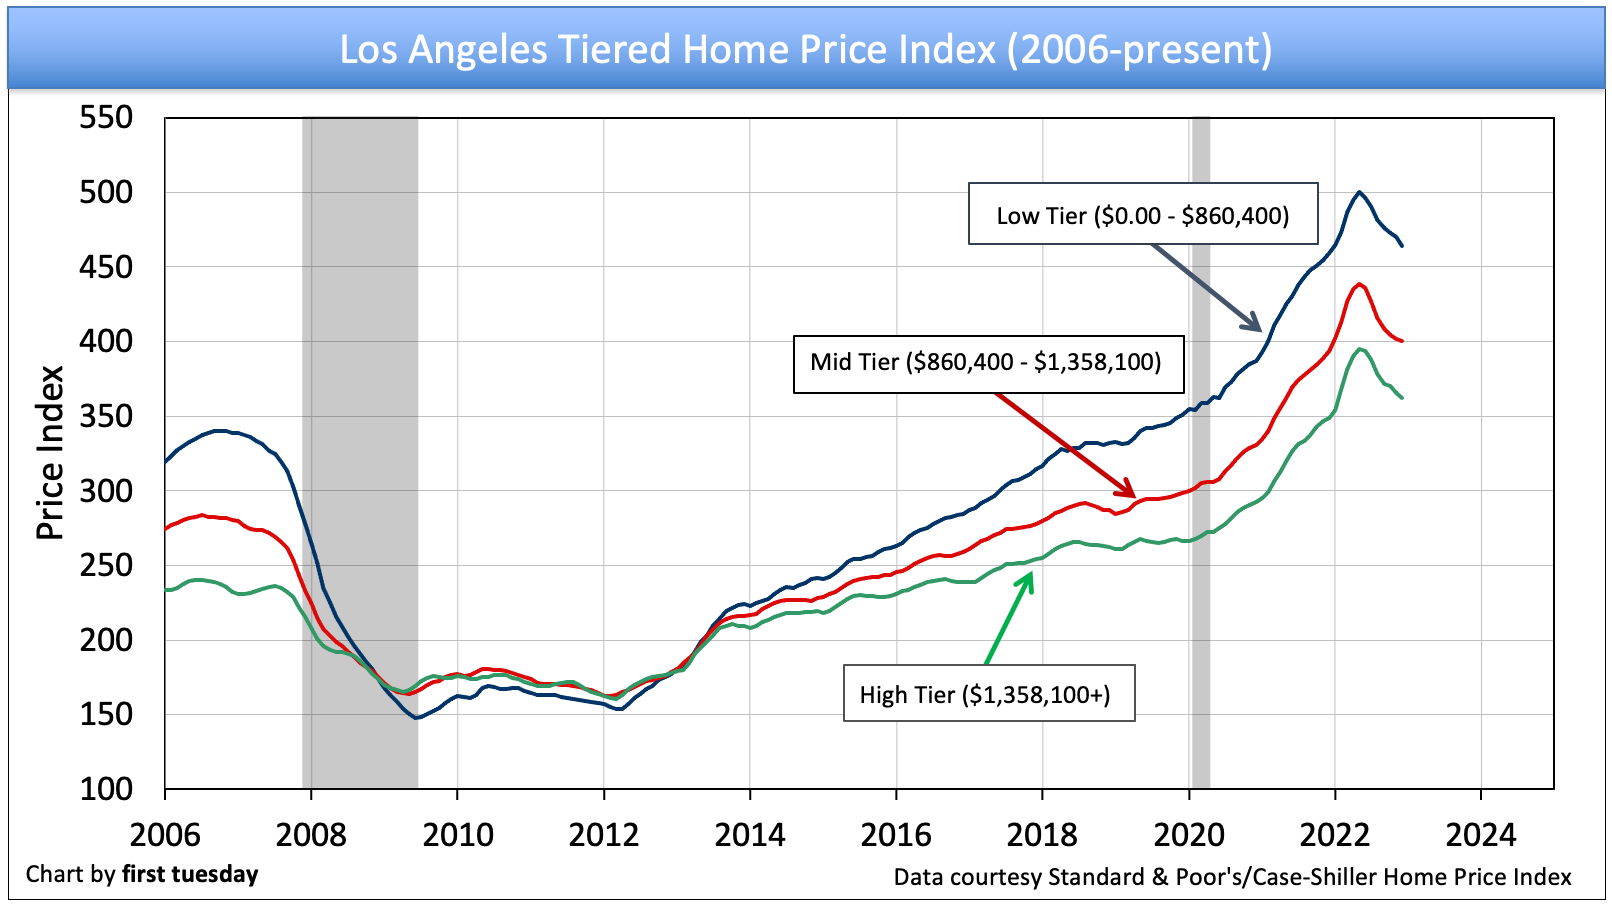 This chart depicts home price movement in Los Angeles's three price tiers.